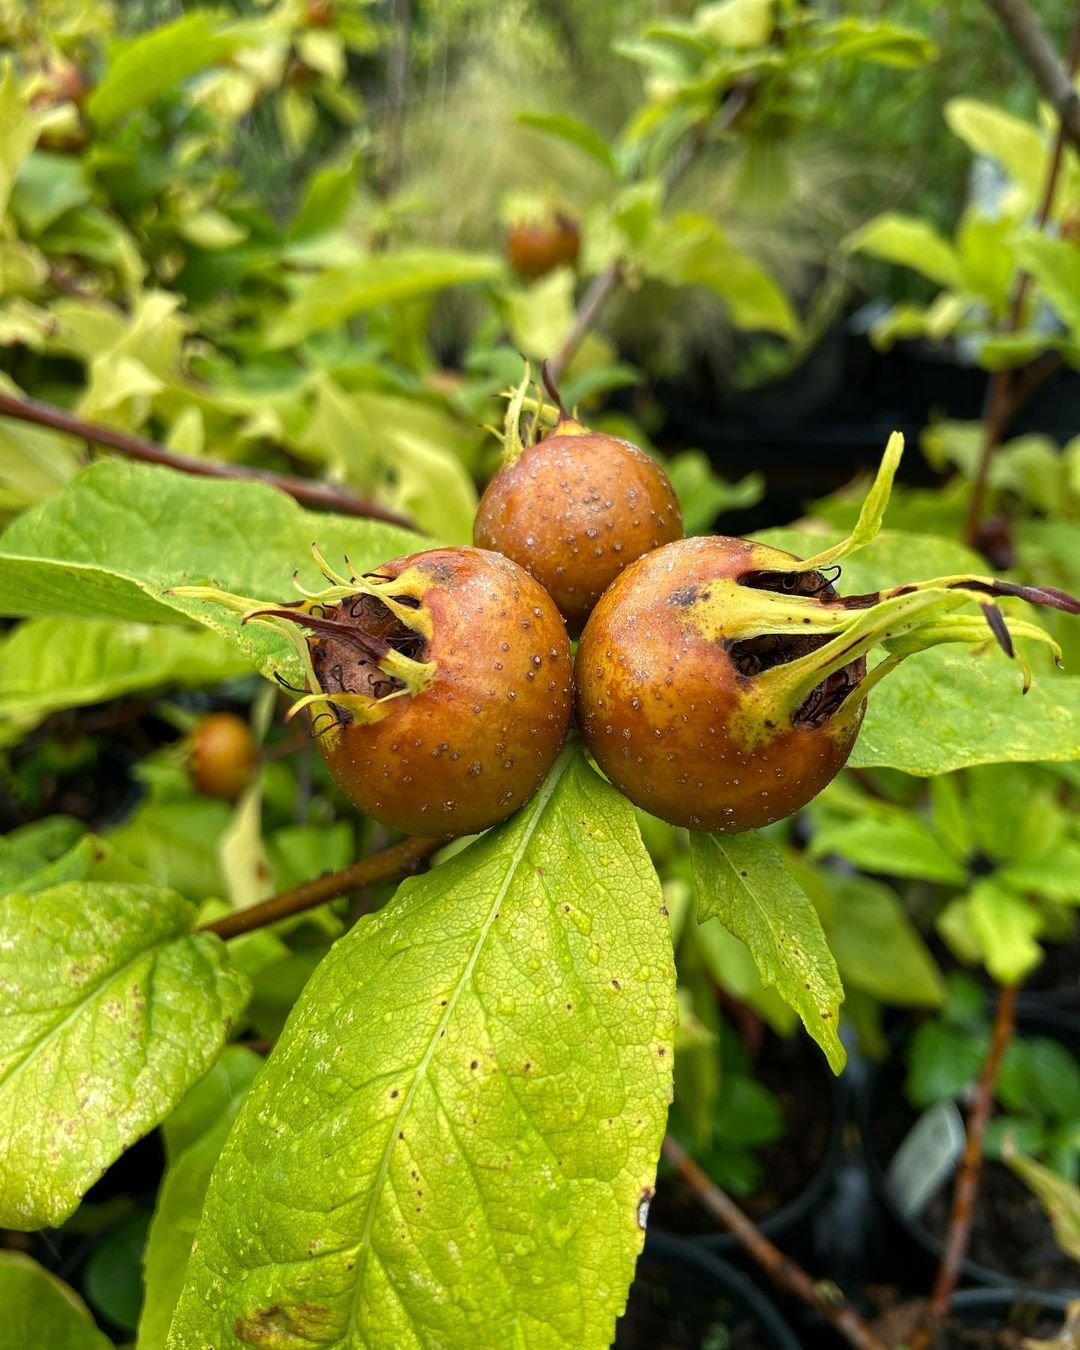 A Medlar plant bearing three ripe fruits, showcasing its unique appearance and delicious harvest.

